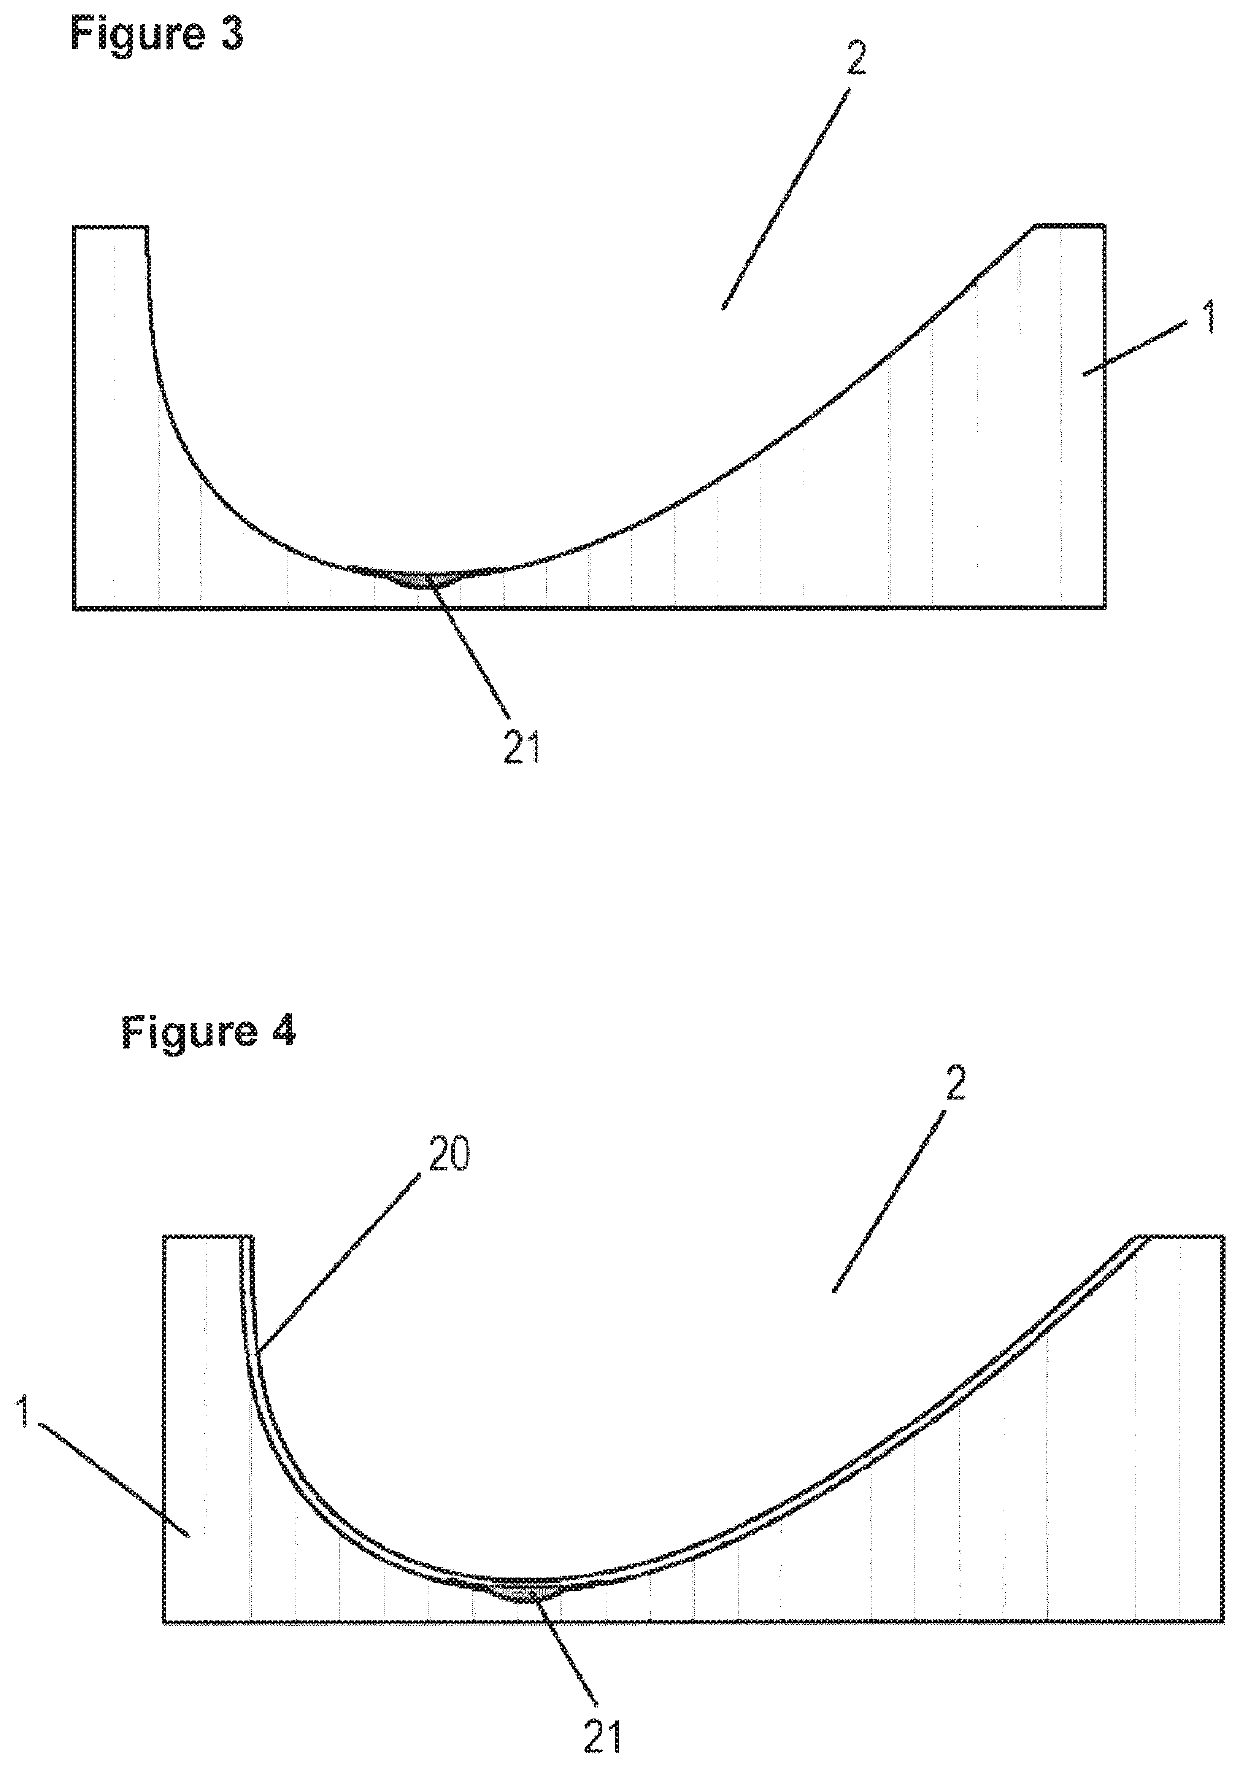 Method for manufacturing a breast prosthesis